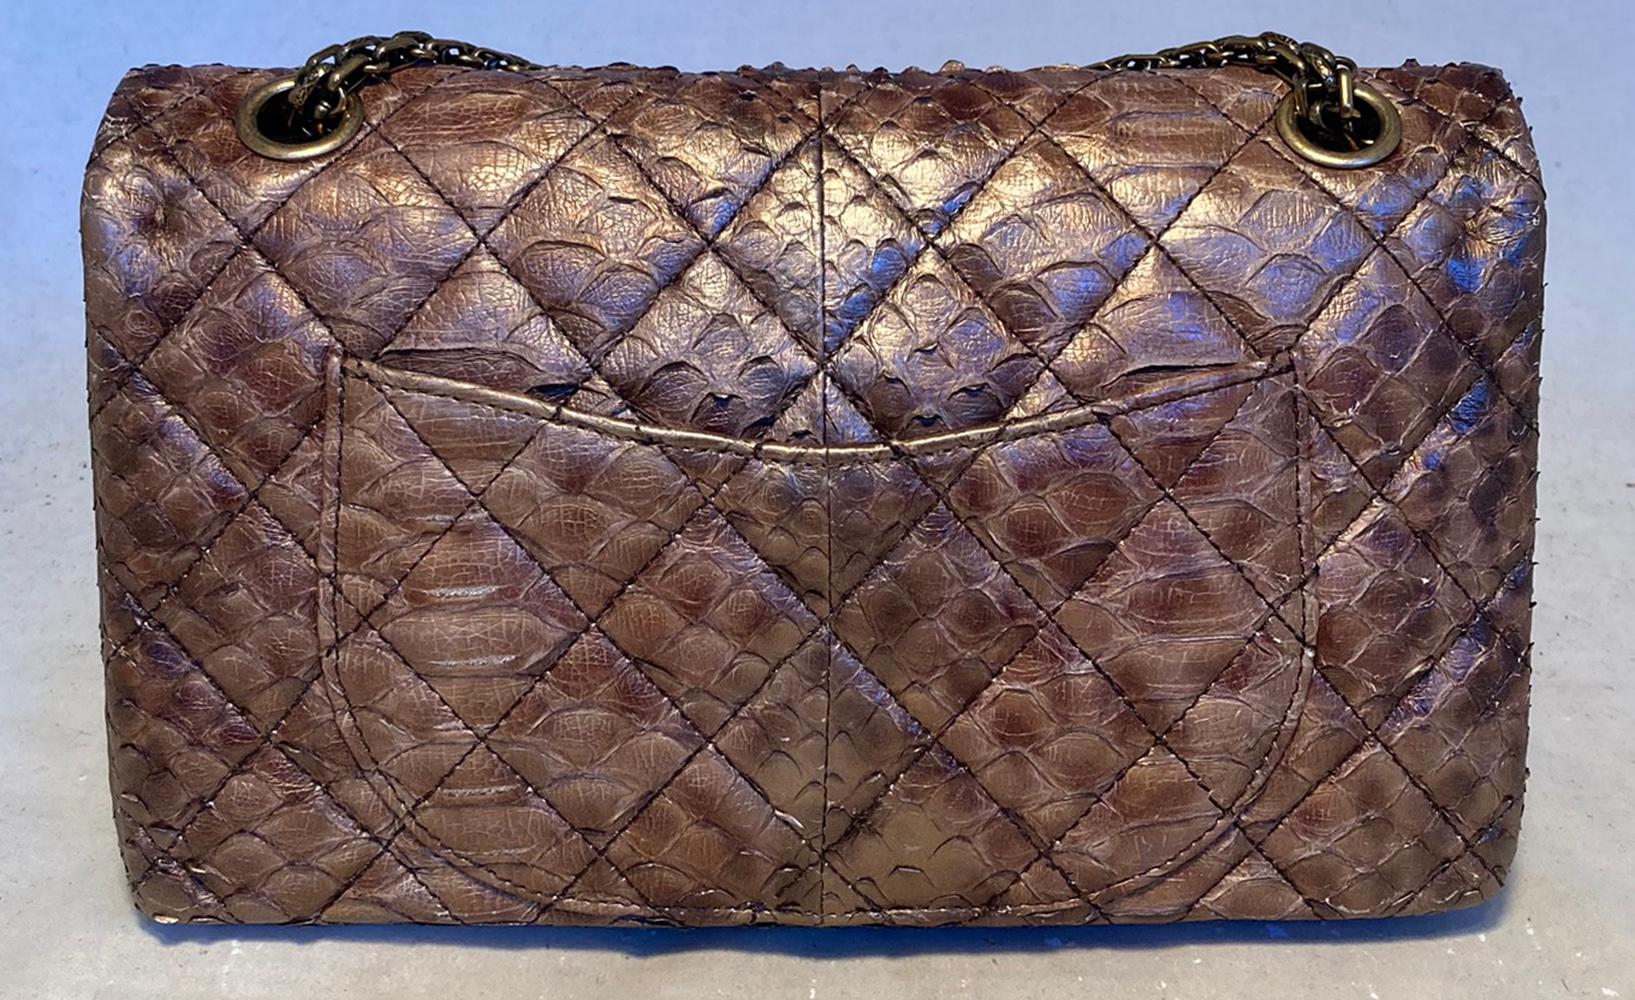 RARE Chanel Metallic Copper Python 2.55 Double Flap Classic in excellent condition. Metallic copper python snakeskin exterior trimmed with bronze hardware. 2 charmes upon the chain shoulder strap, one bronze cat with black enamel stripes and